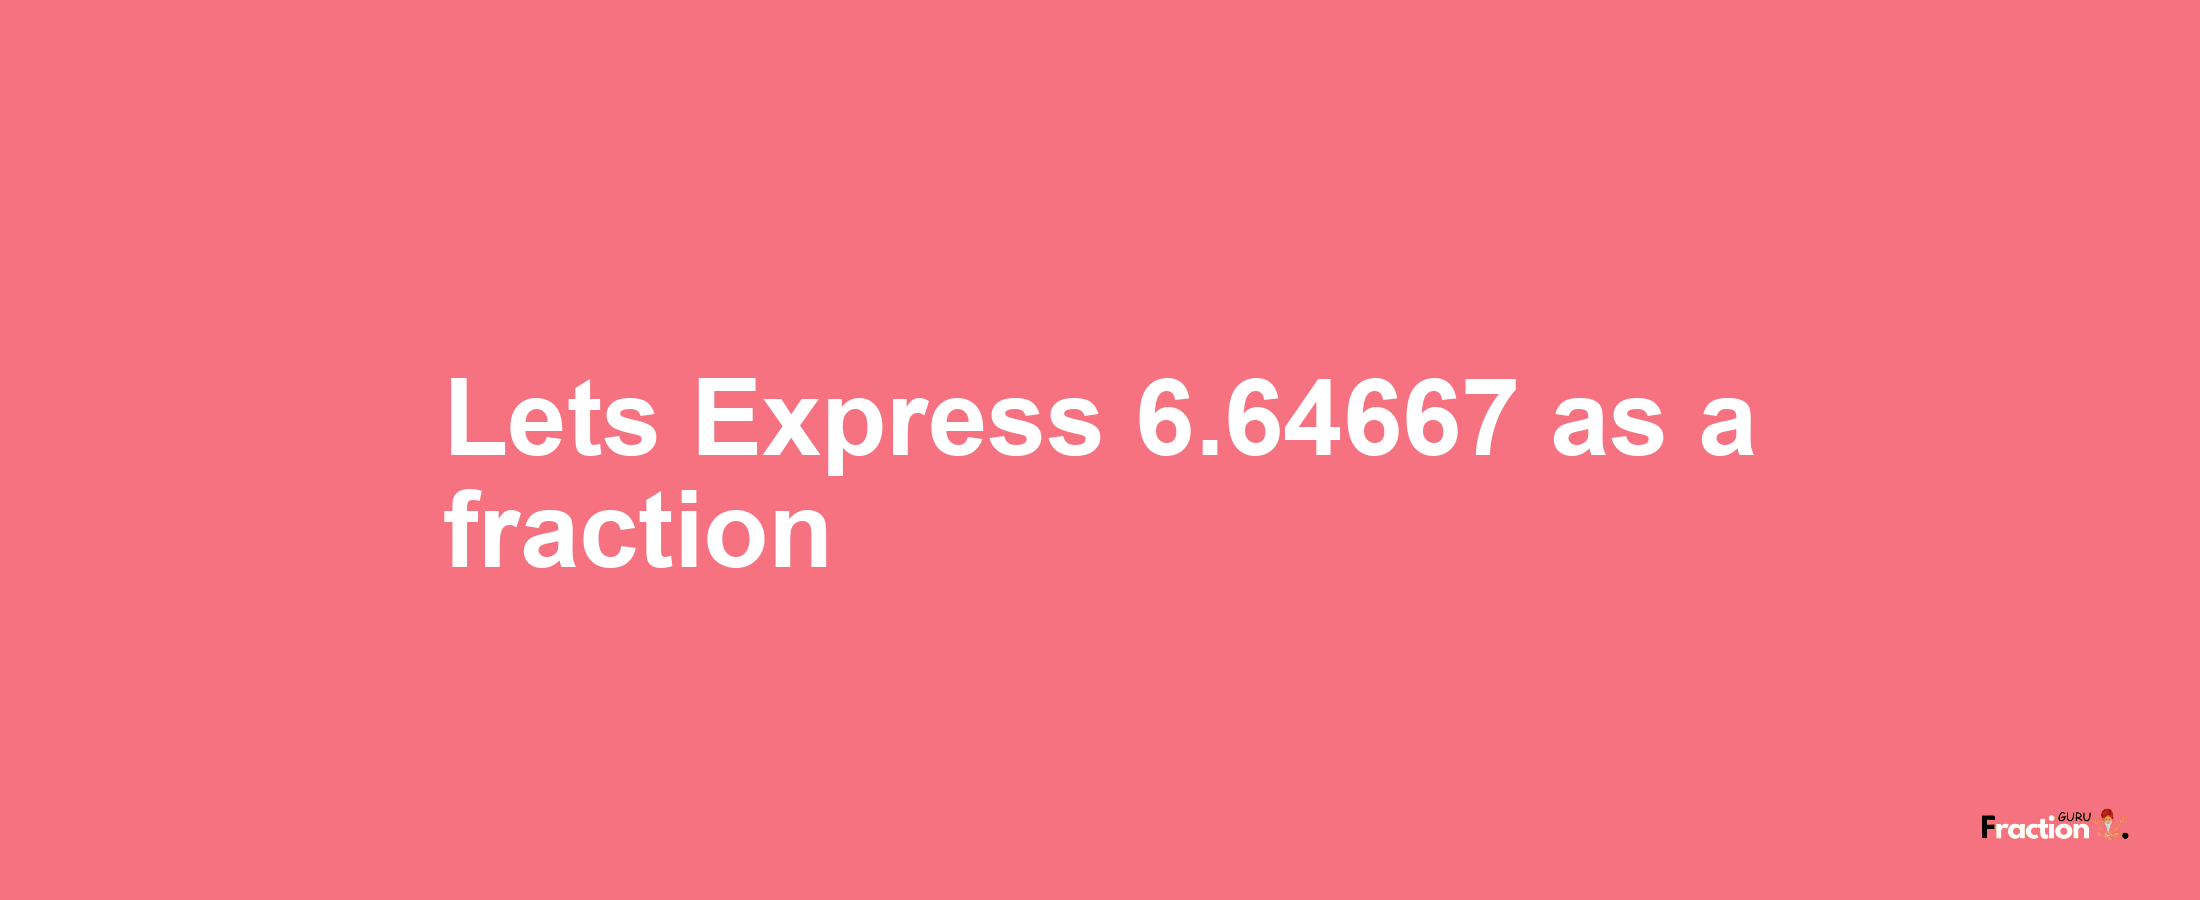 Lets Express 6.64667 as afraction